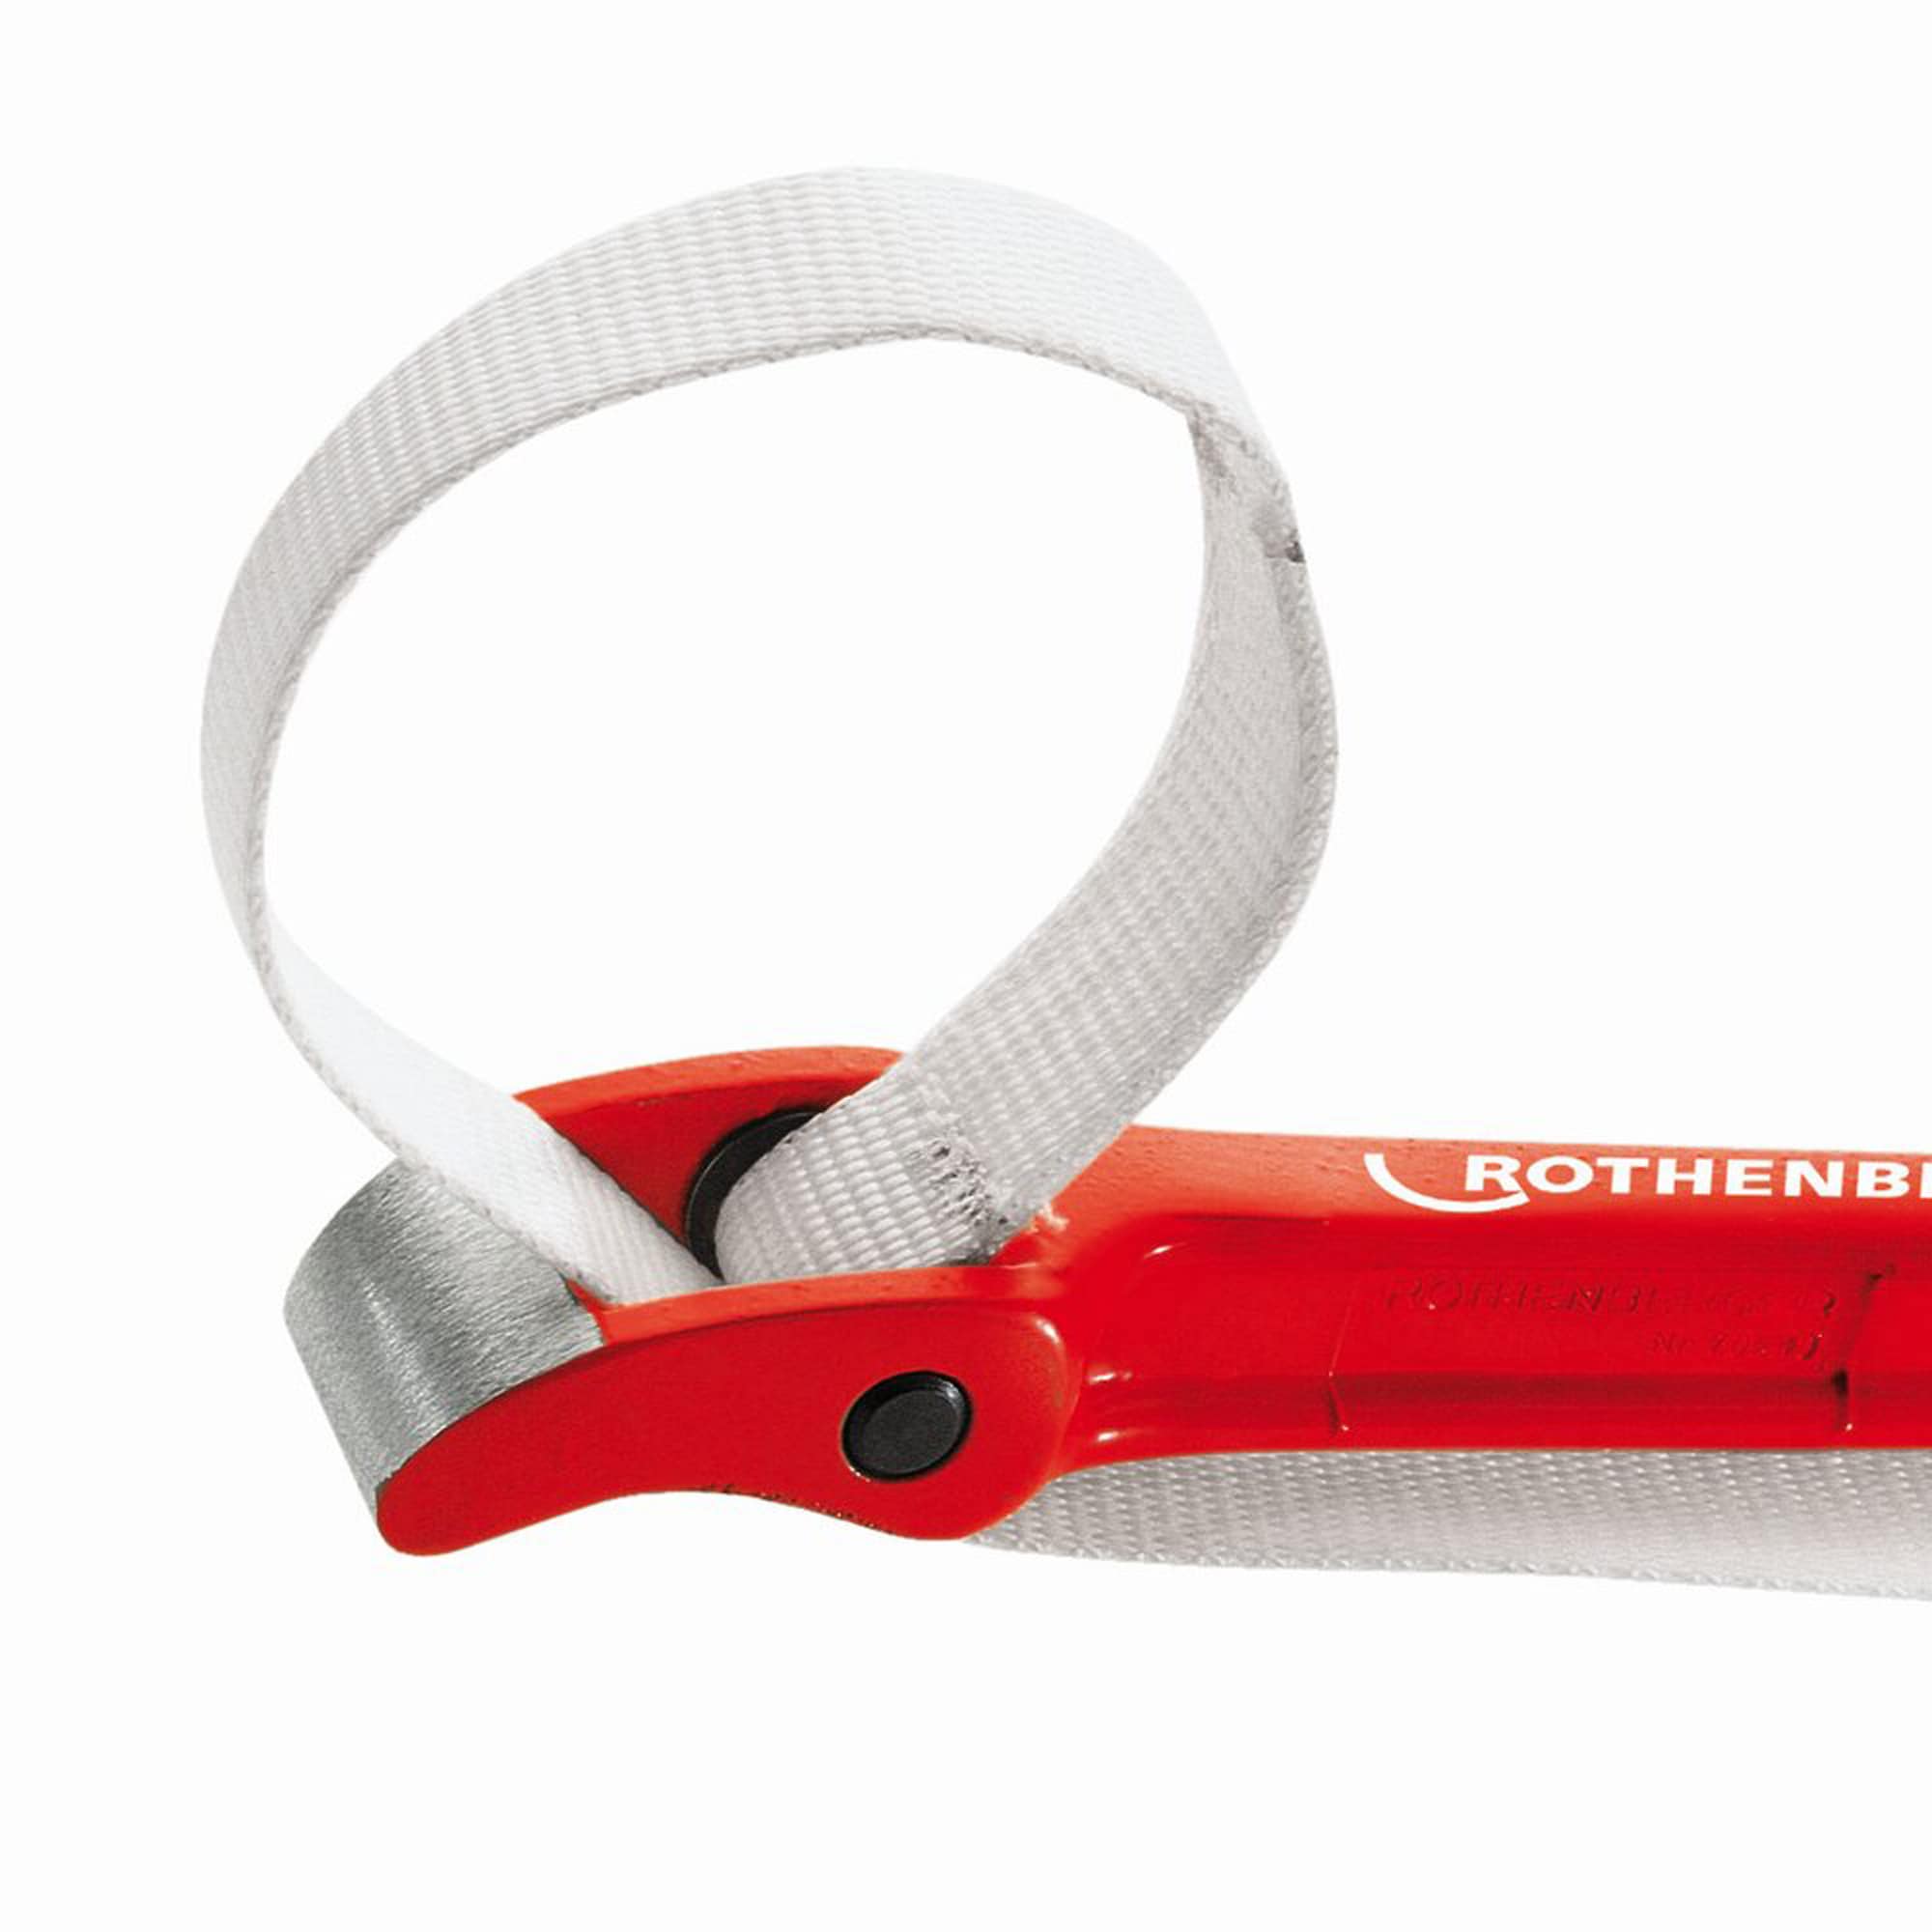 Rothenberger Pipe Wrenches at Lowes.com